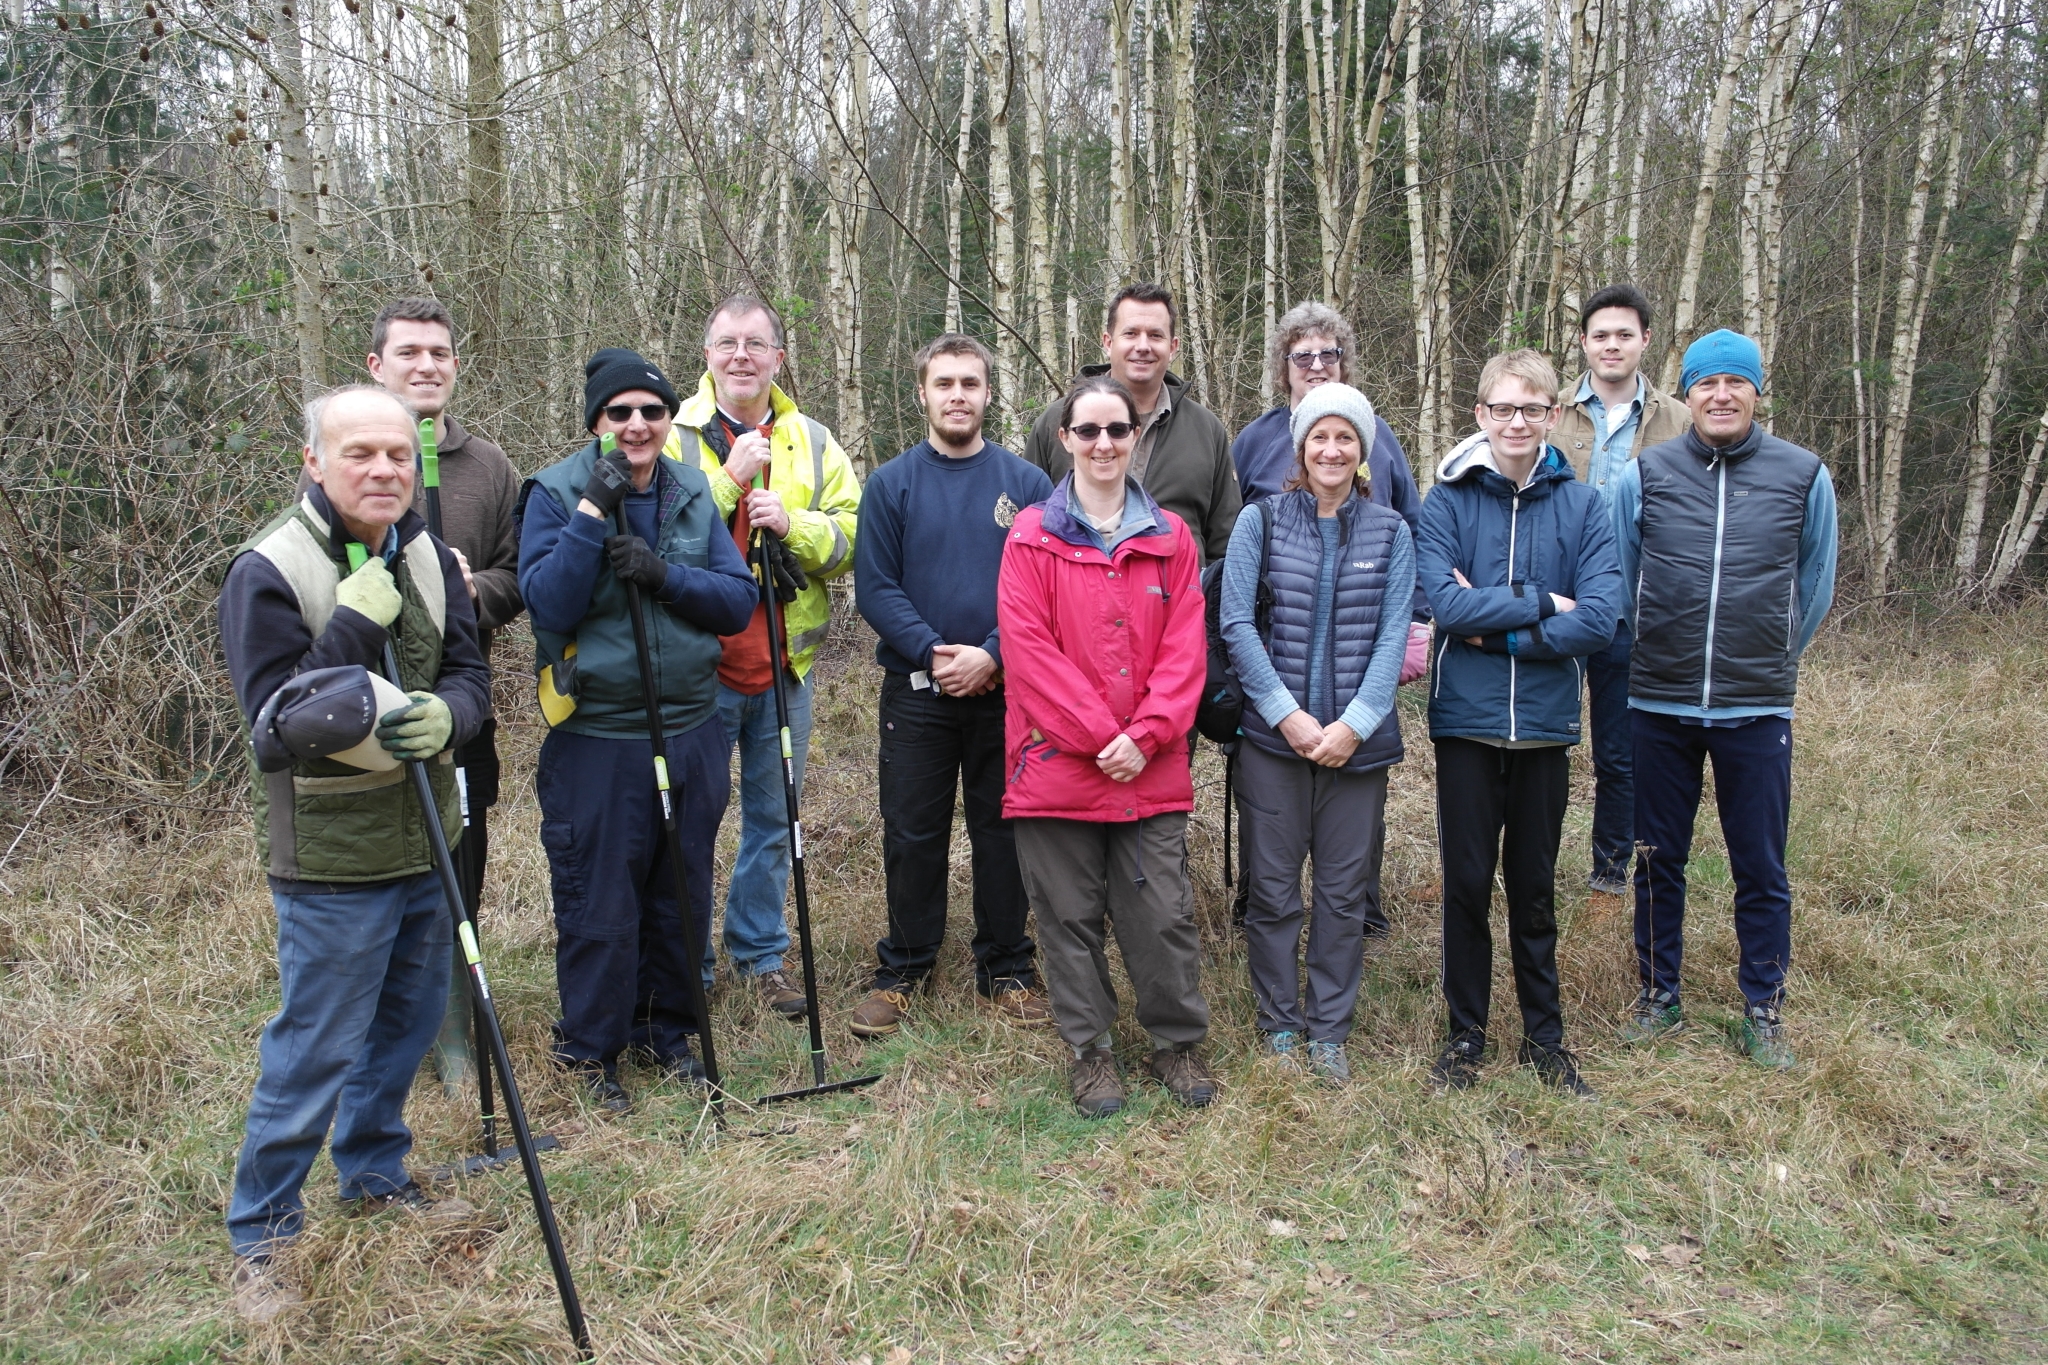 A photo from the FoTF Conservation Event - March 2020 - Habitat Improvement at Quakers Walk, Mildenhall Woods : A group photo of the the volunteers